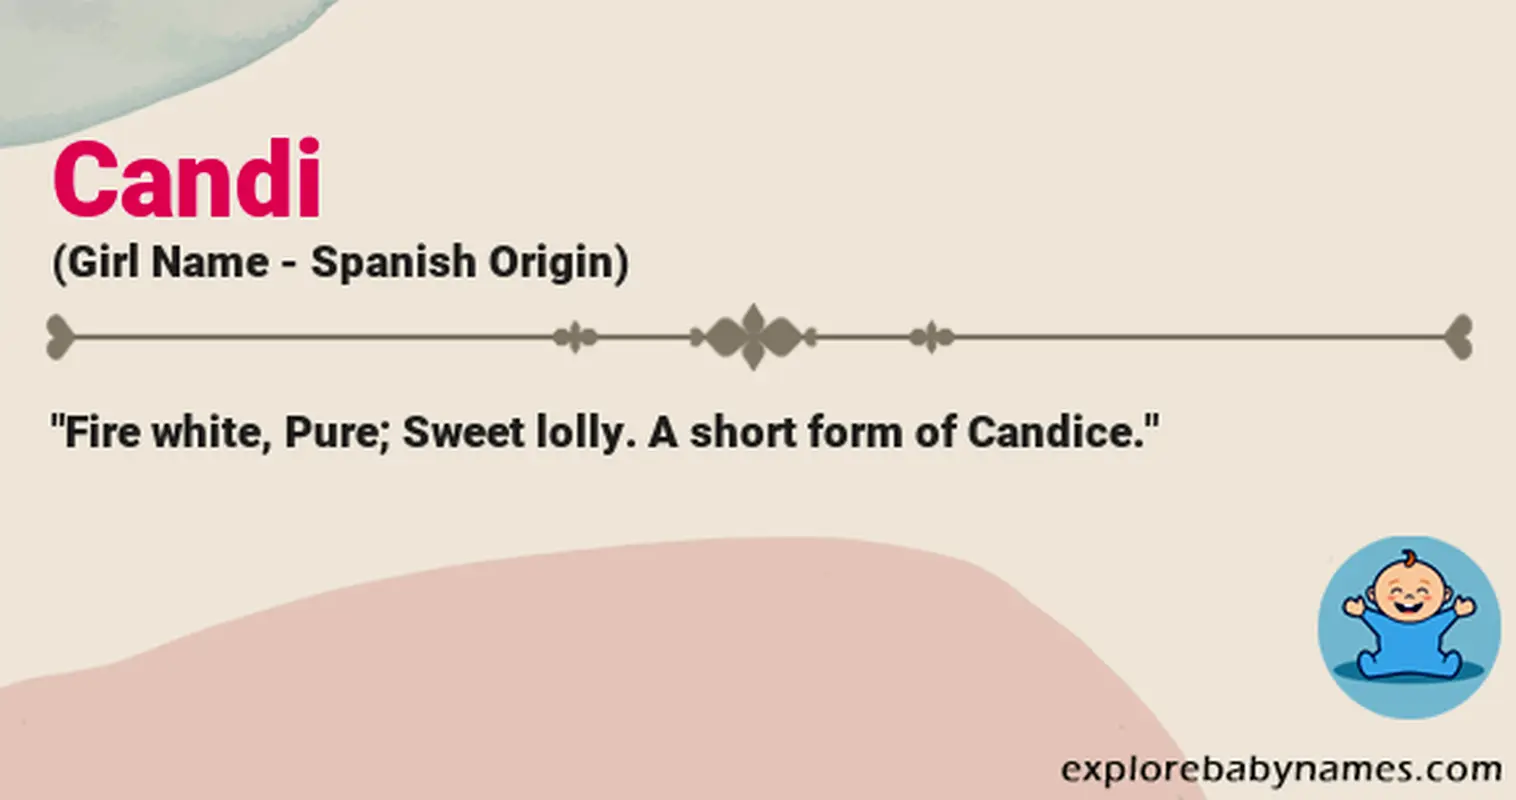 Meaning of Candi